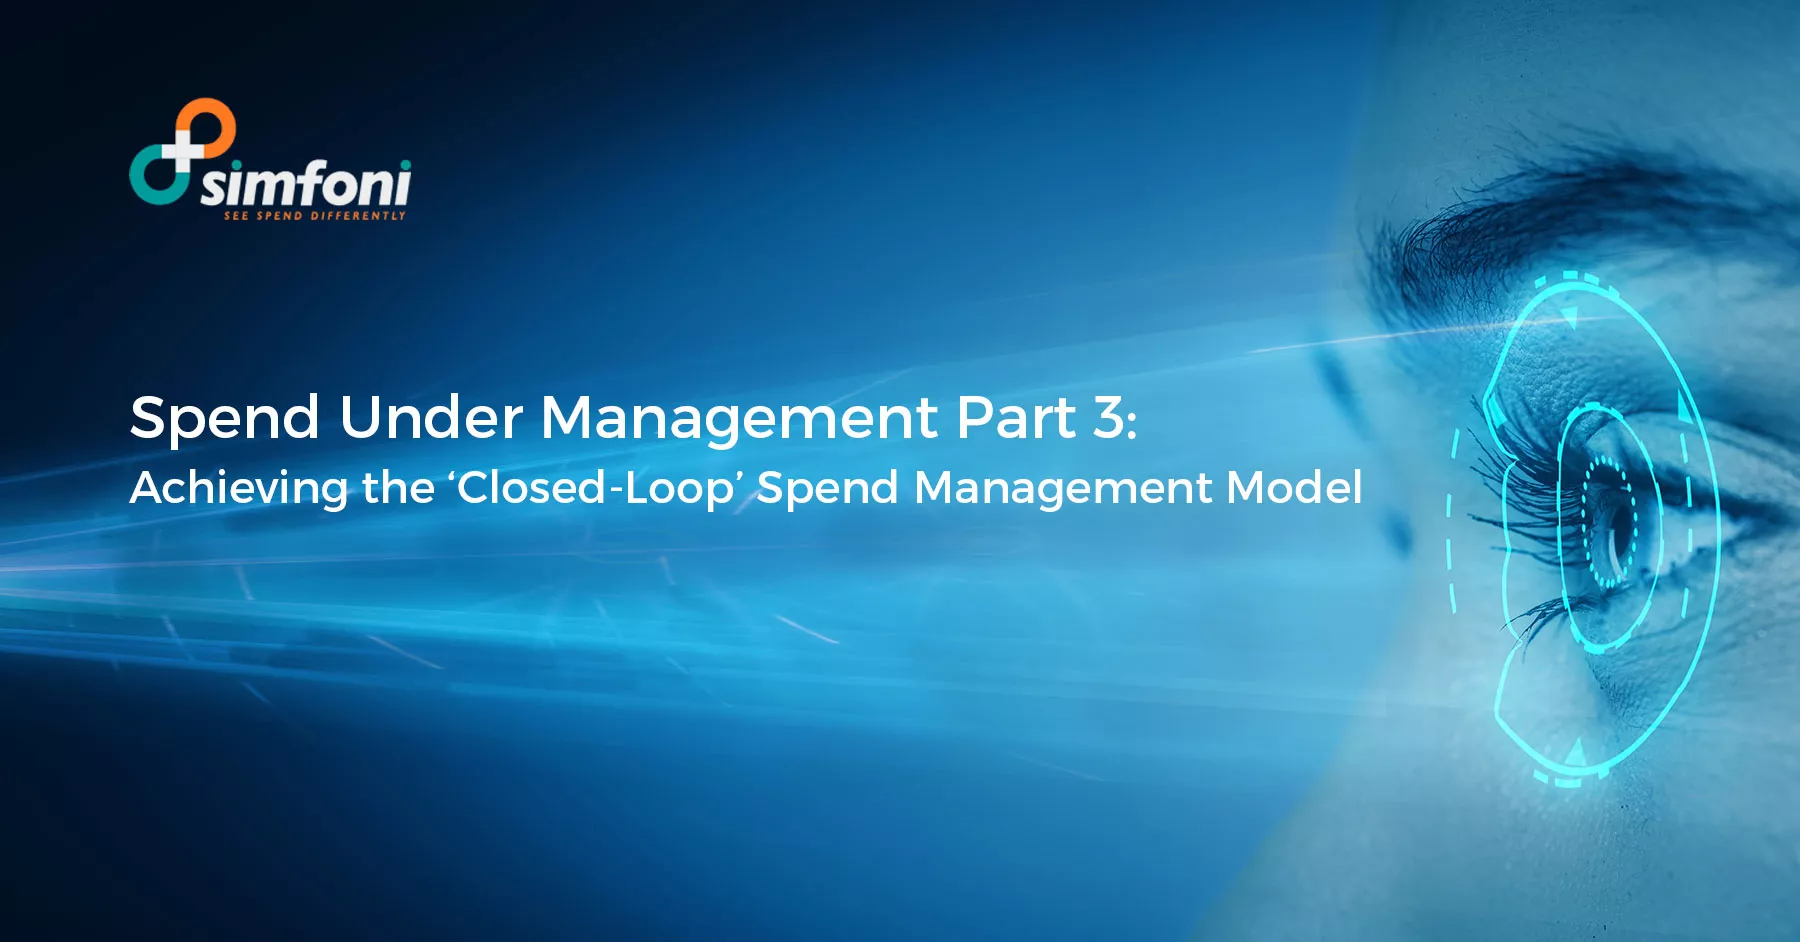 Spend Under Management Part Three: Achieving the ‘Closed-Loop’ Spend Management Model